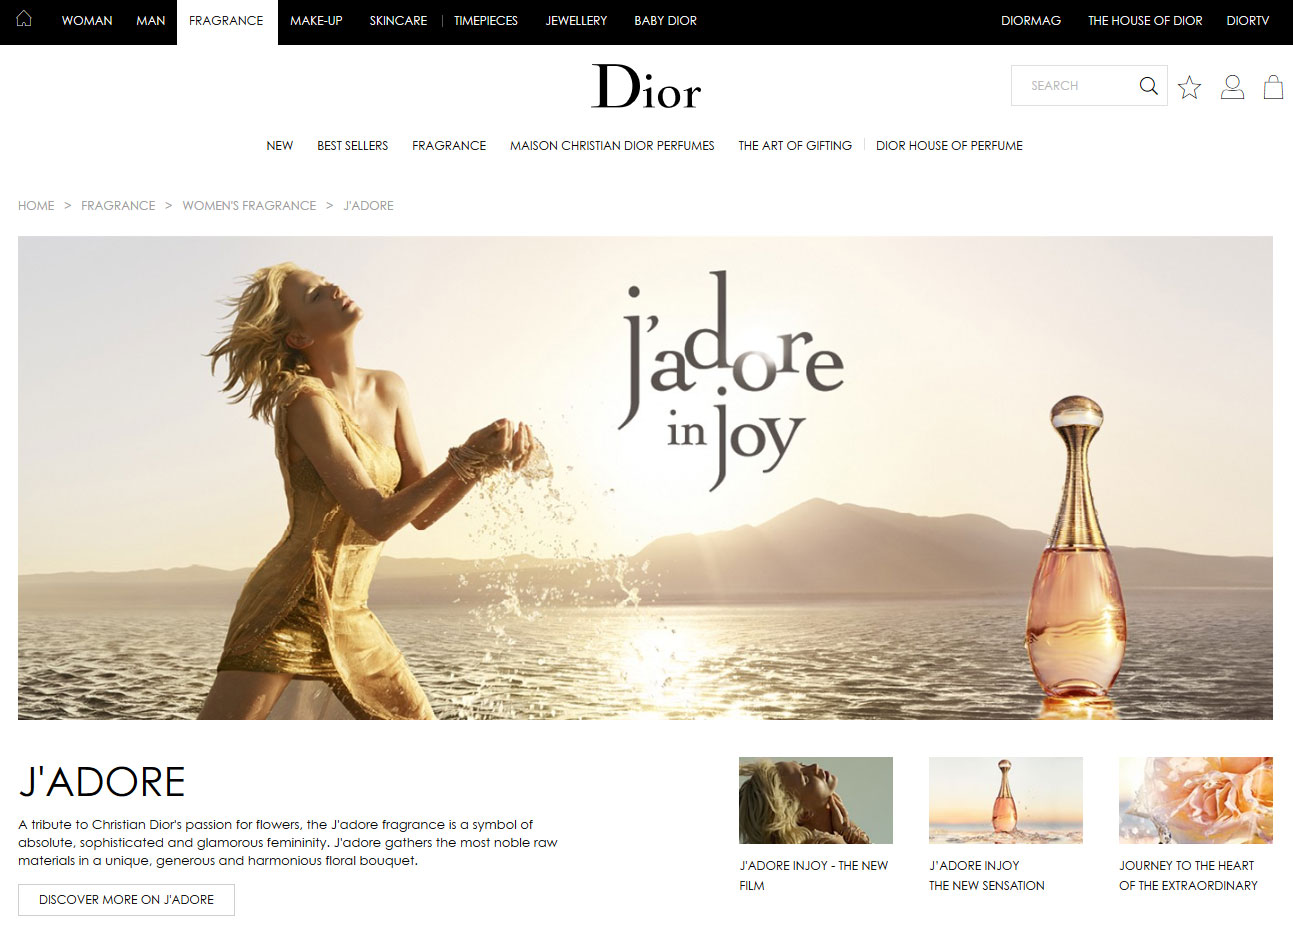 Dior J'adore Injoy Campaign featuring Charlize Theron